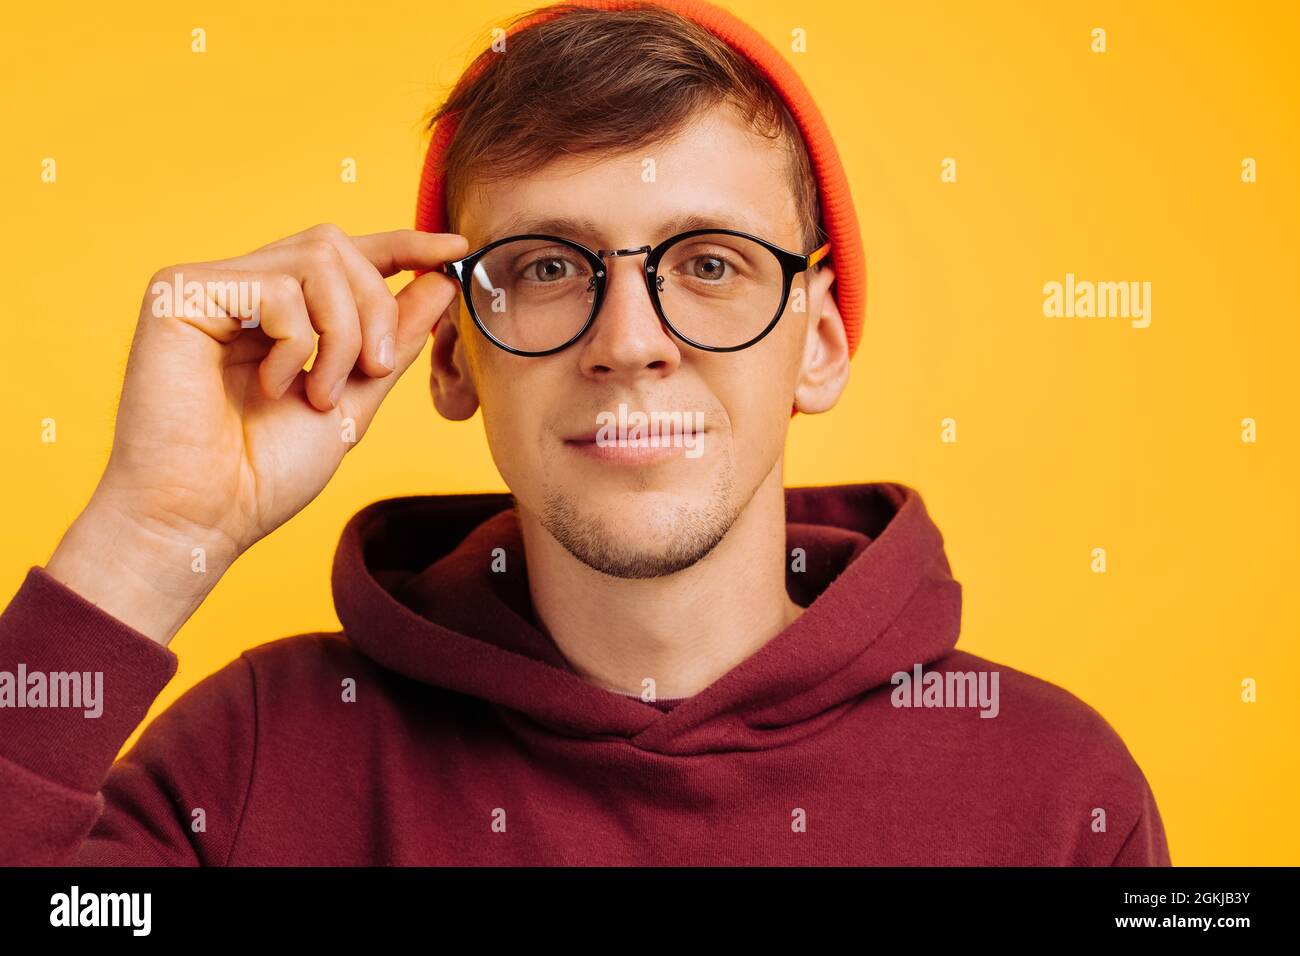 guy has poor eyesight, a handsome guy in an orange hat and red light and glasses for vision squints, on a yellow background Stock Photo